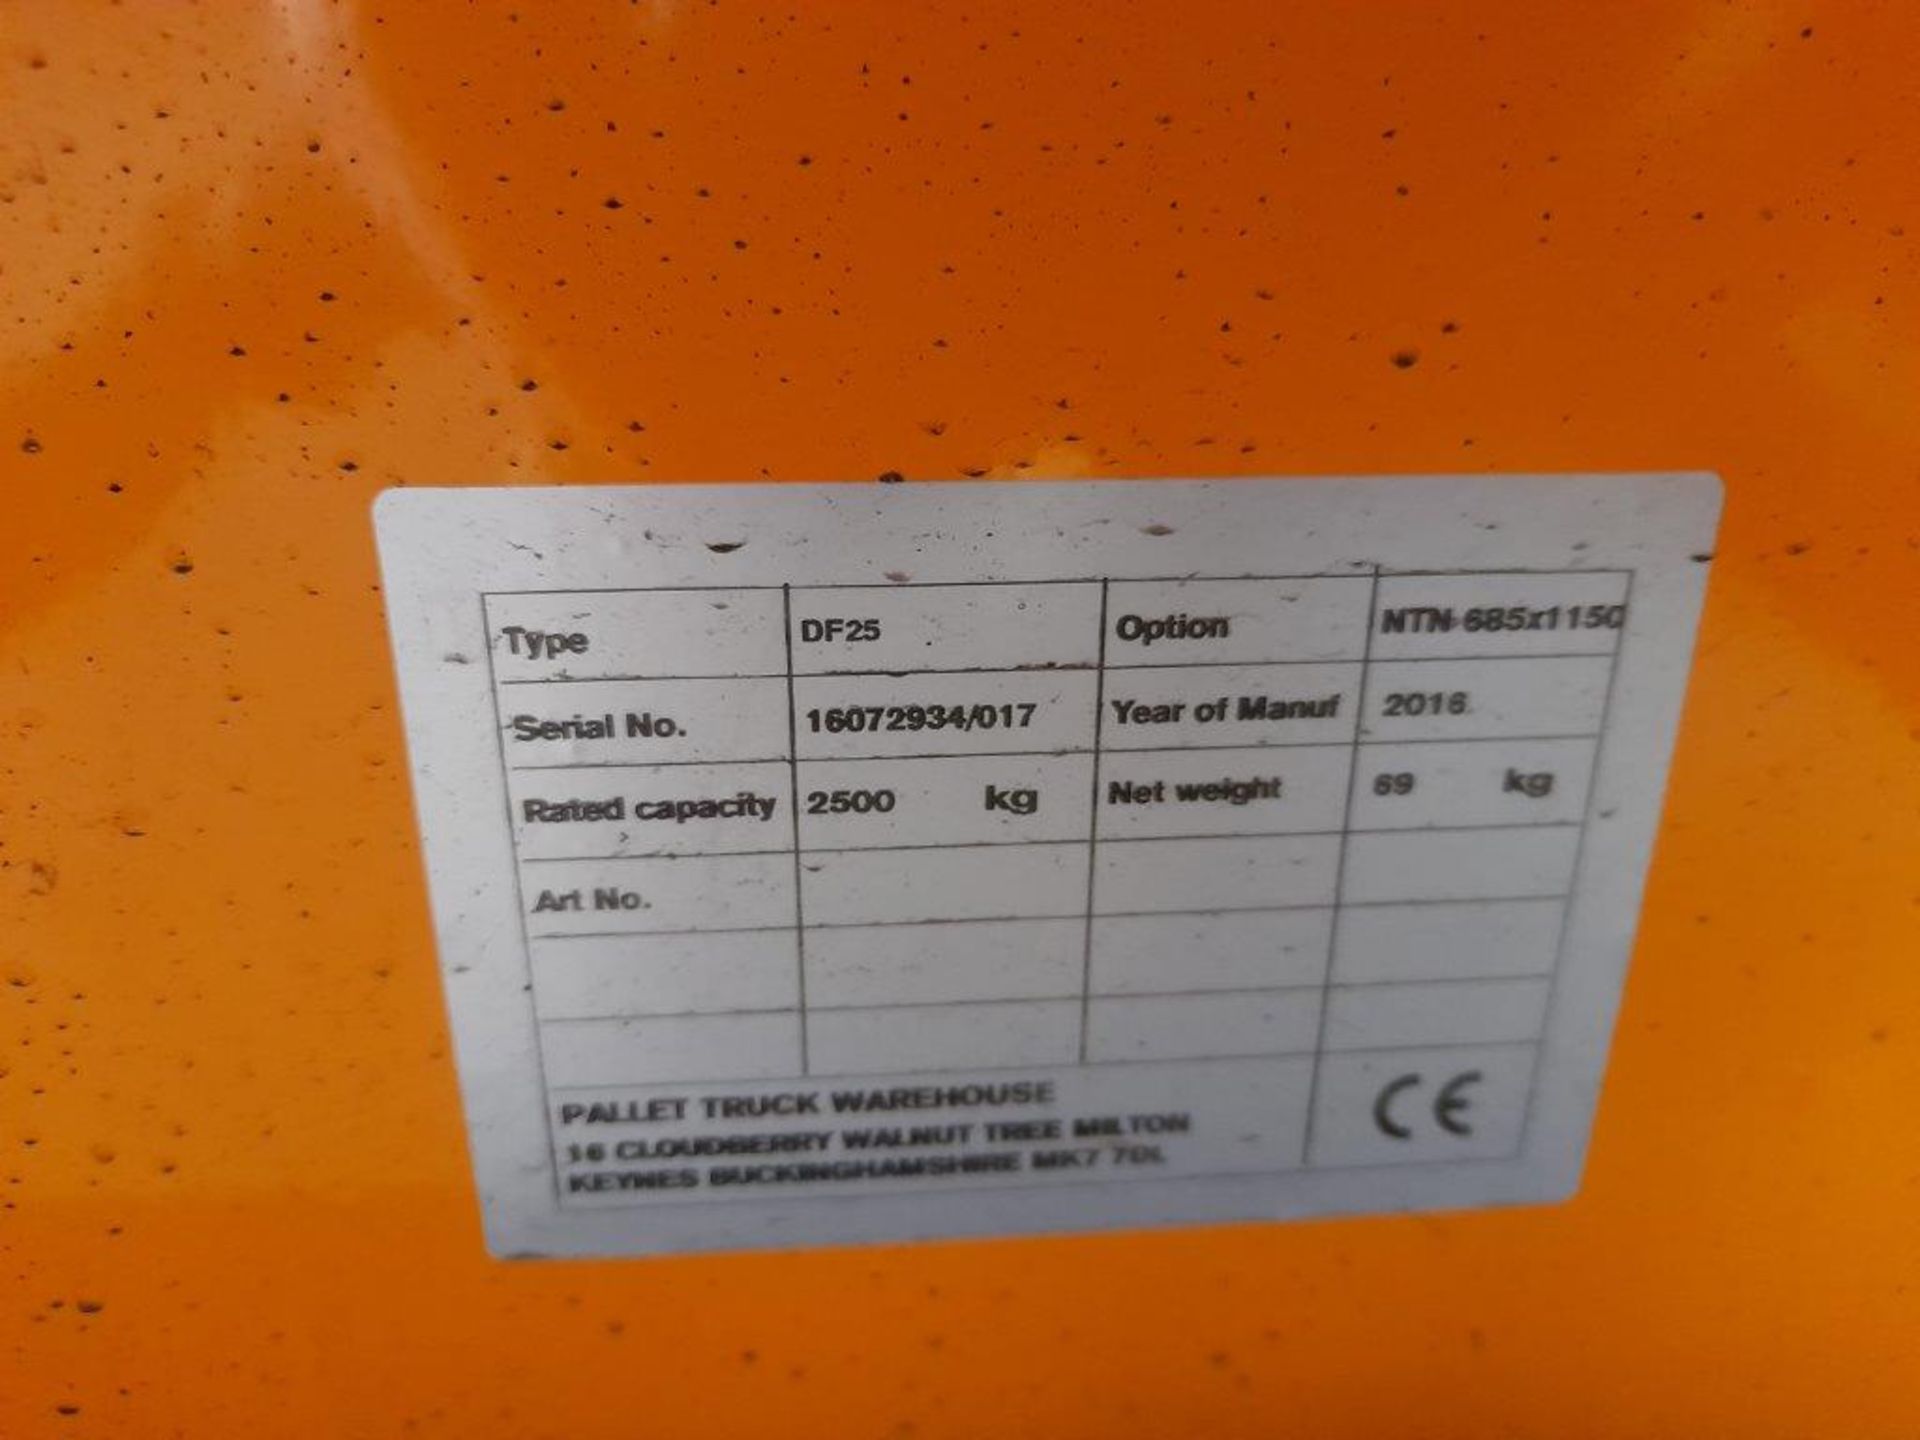 Pallet truck warehouse DF25 hydraulic pallet truck, serial no. 16072934/017 (2016), rated capacity - Image 3 of 3